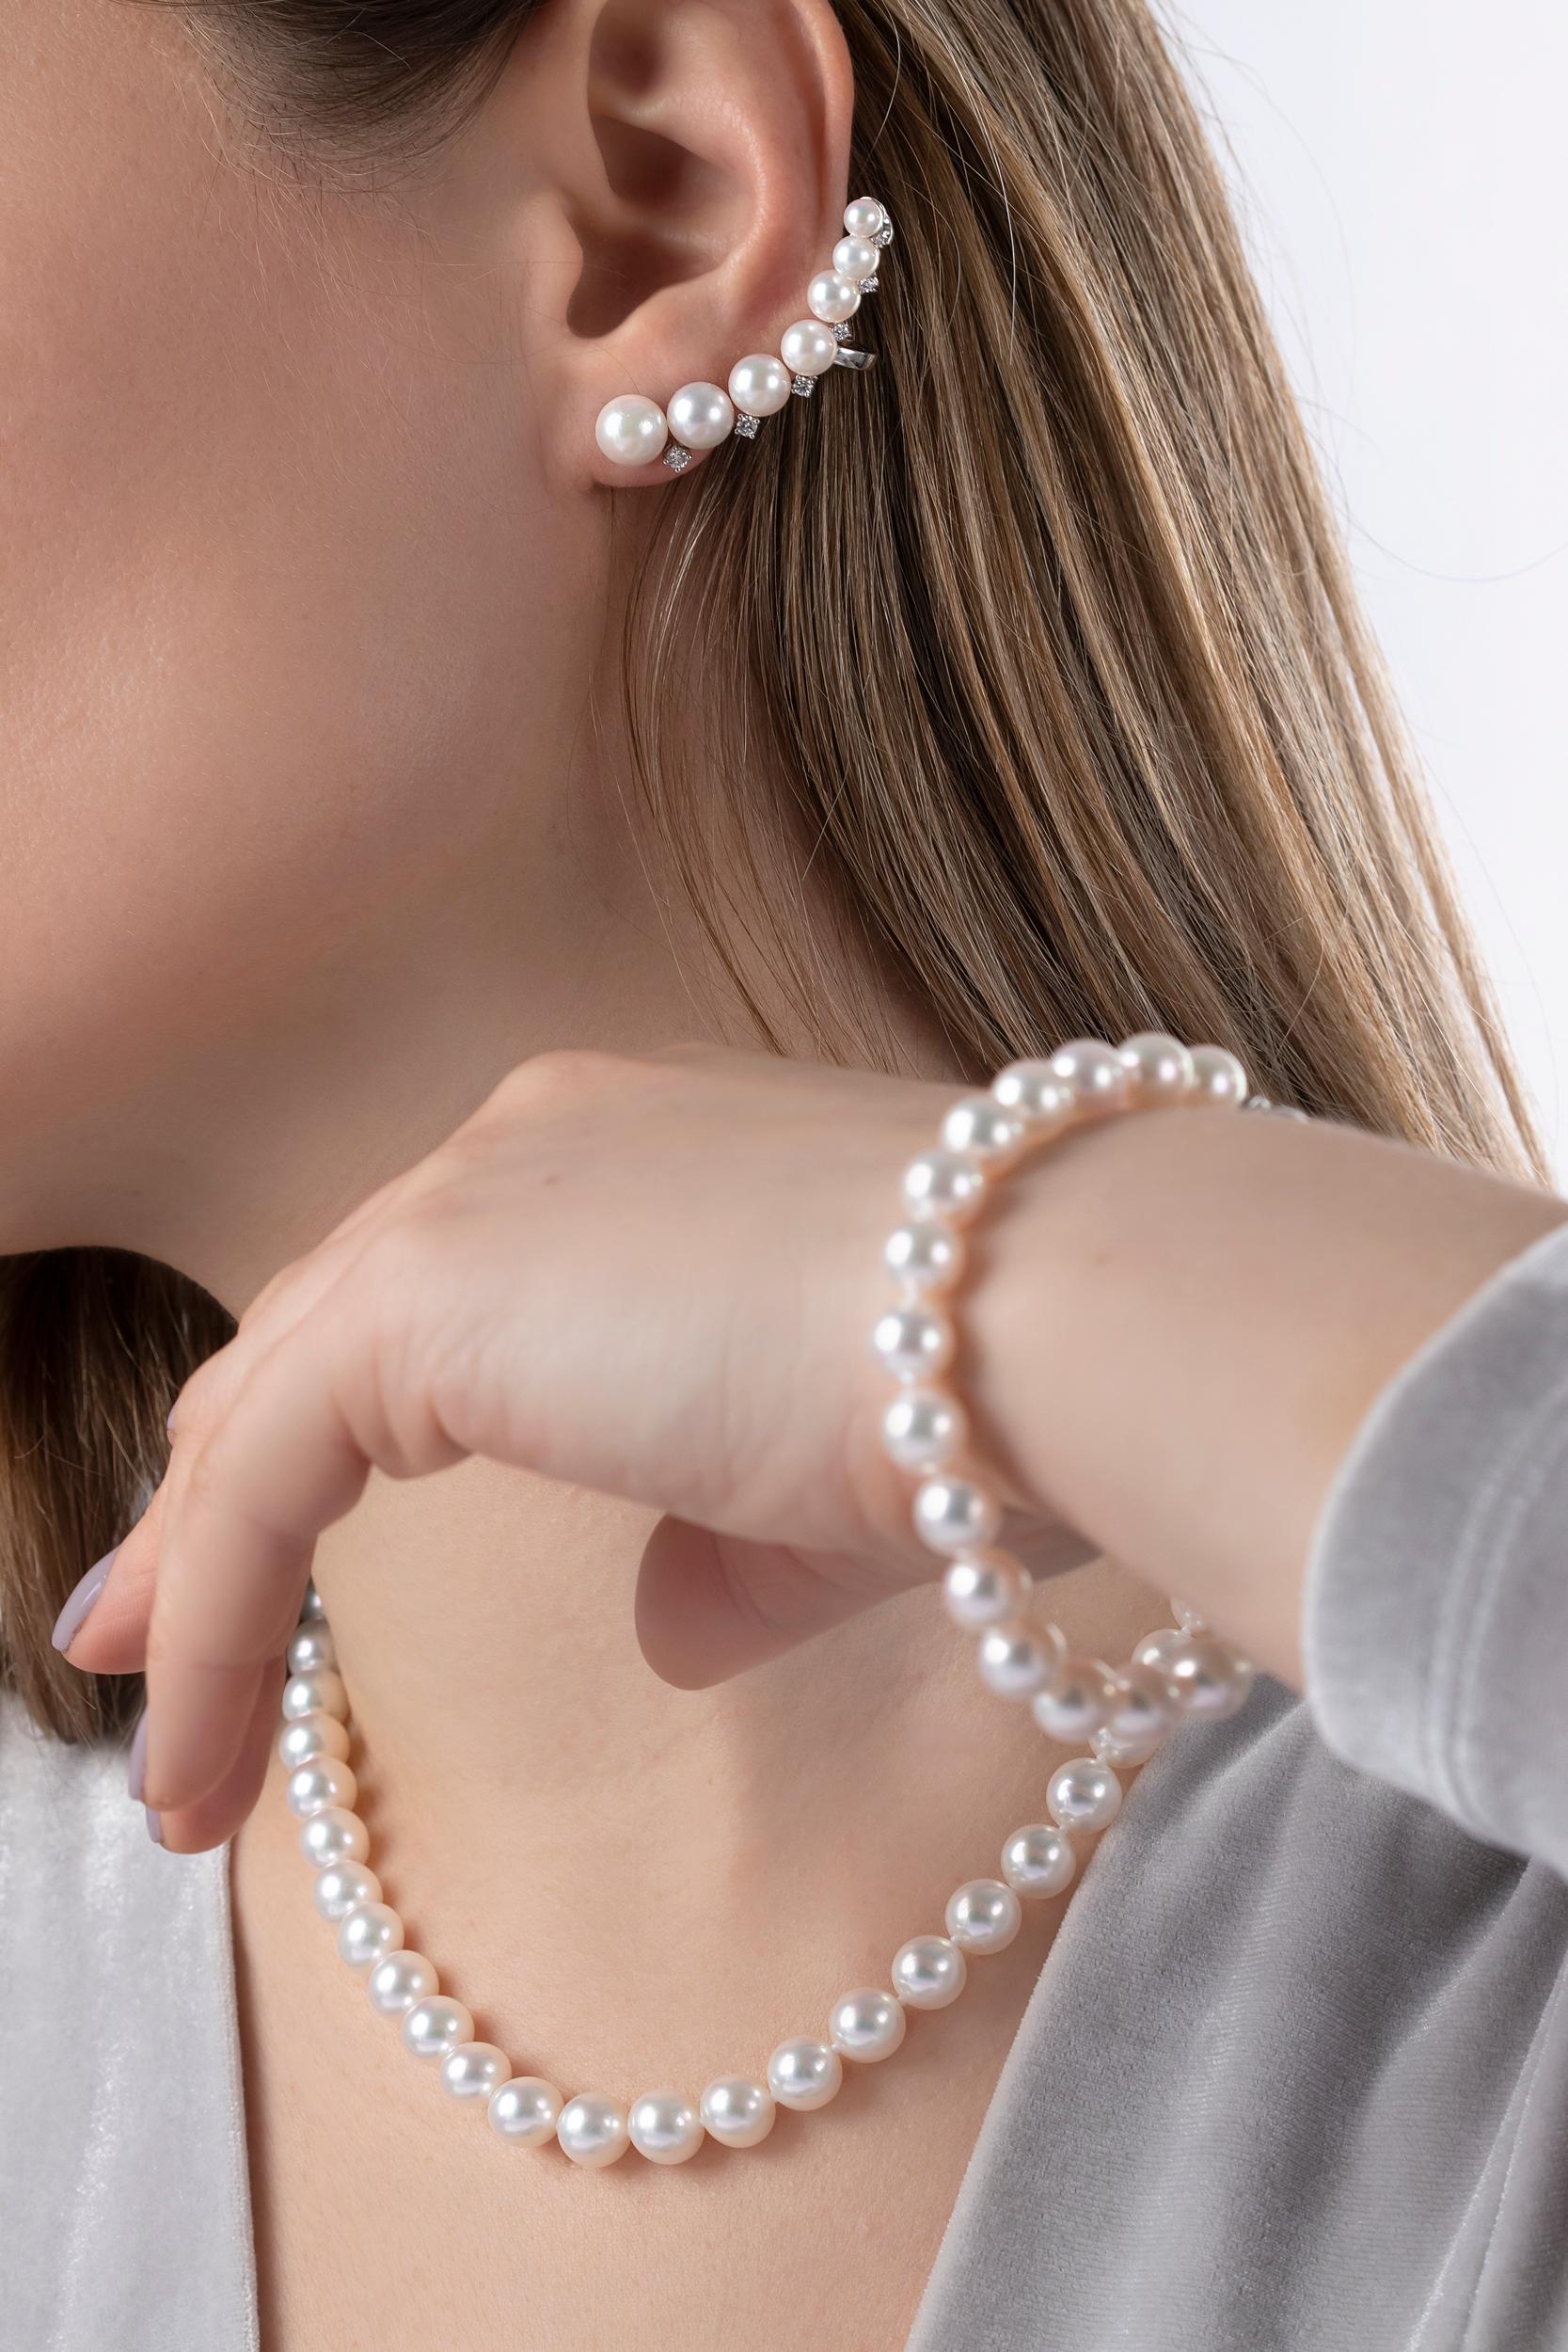 Elegant and exciting, this contemporary design by Yoko London features a climbing pattern of size-graduating Akoya pearls set among 18K White gold and sparkling white diamonds. Secured to the ear with a post and scroll fitting at the lobe and a clip